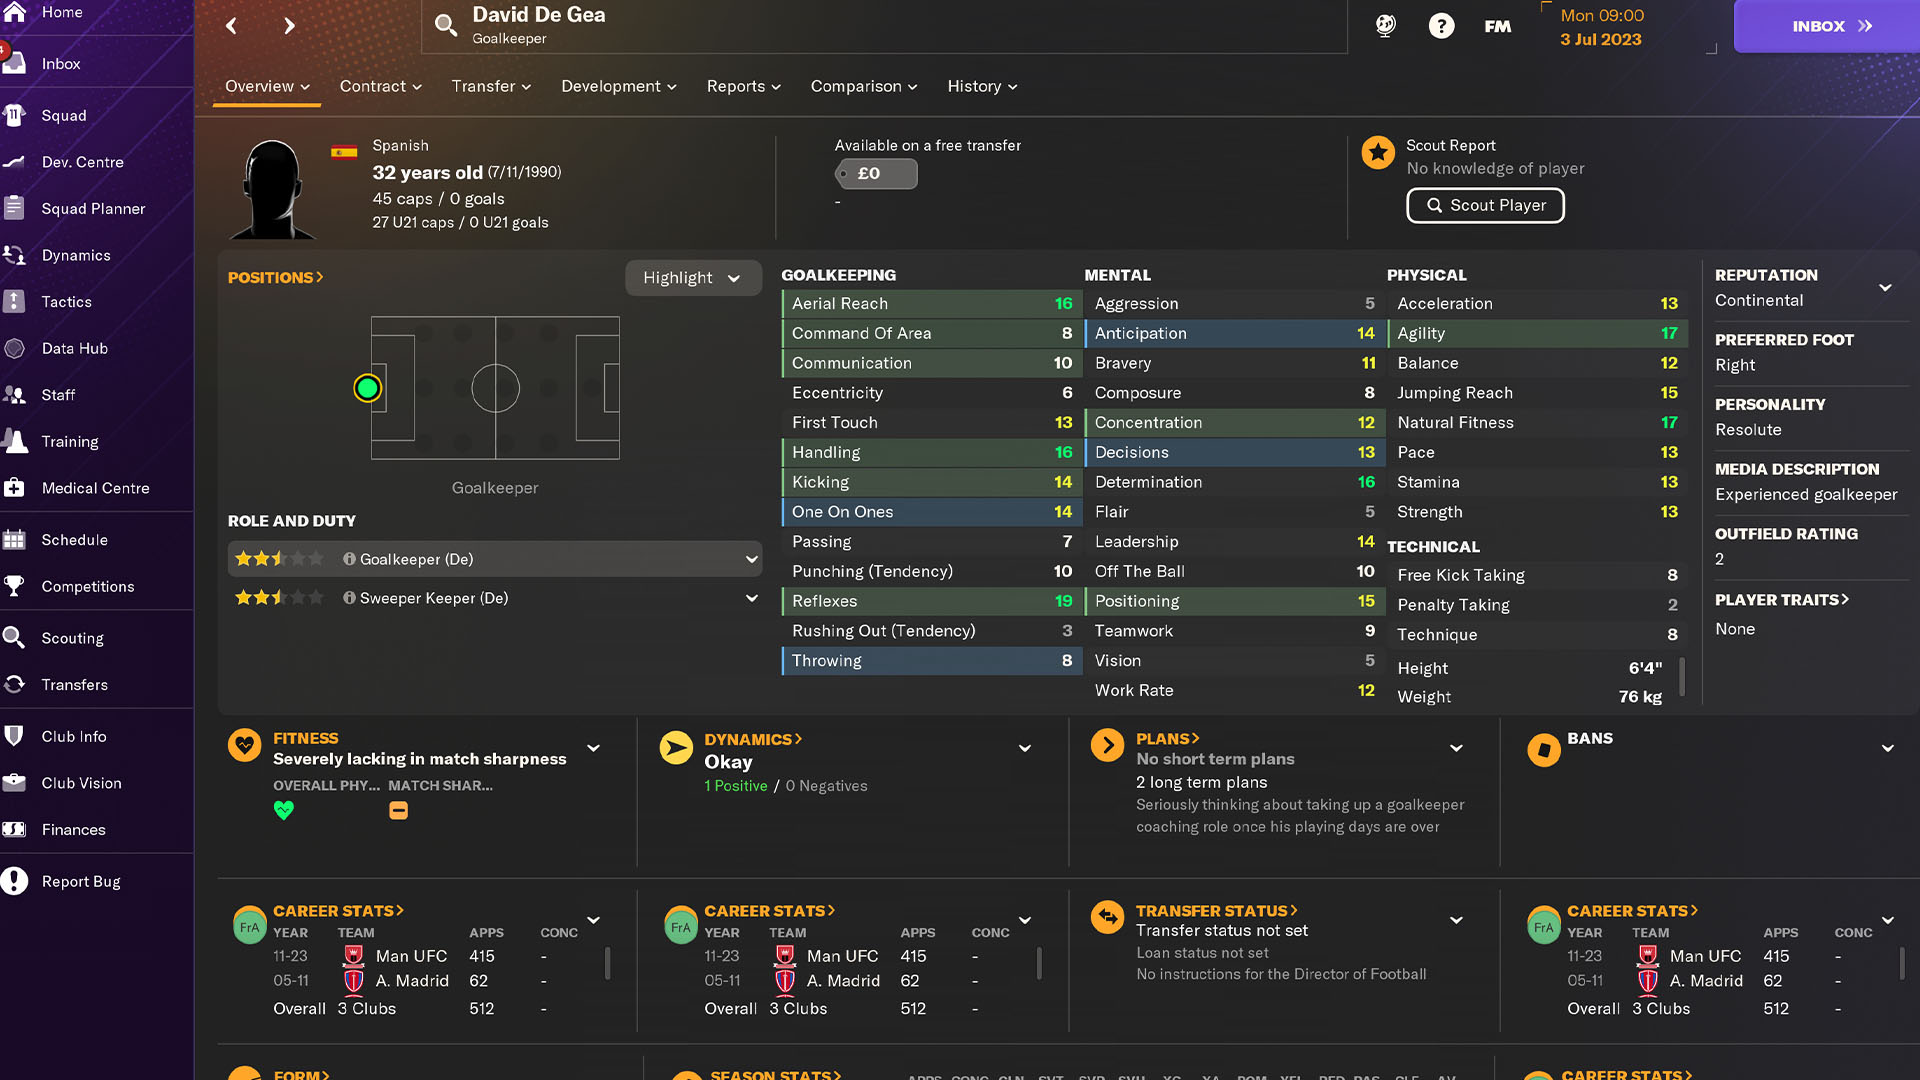 Football Manager 2024 Best Free Players